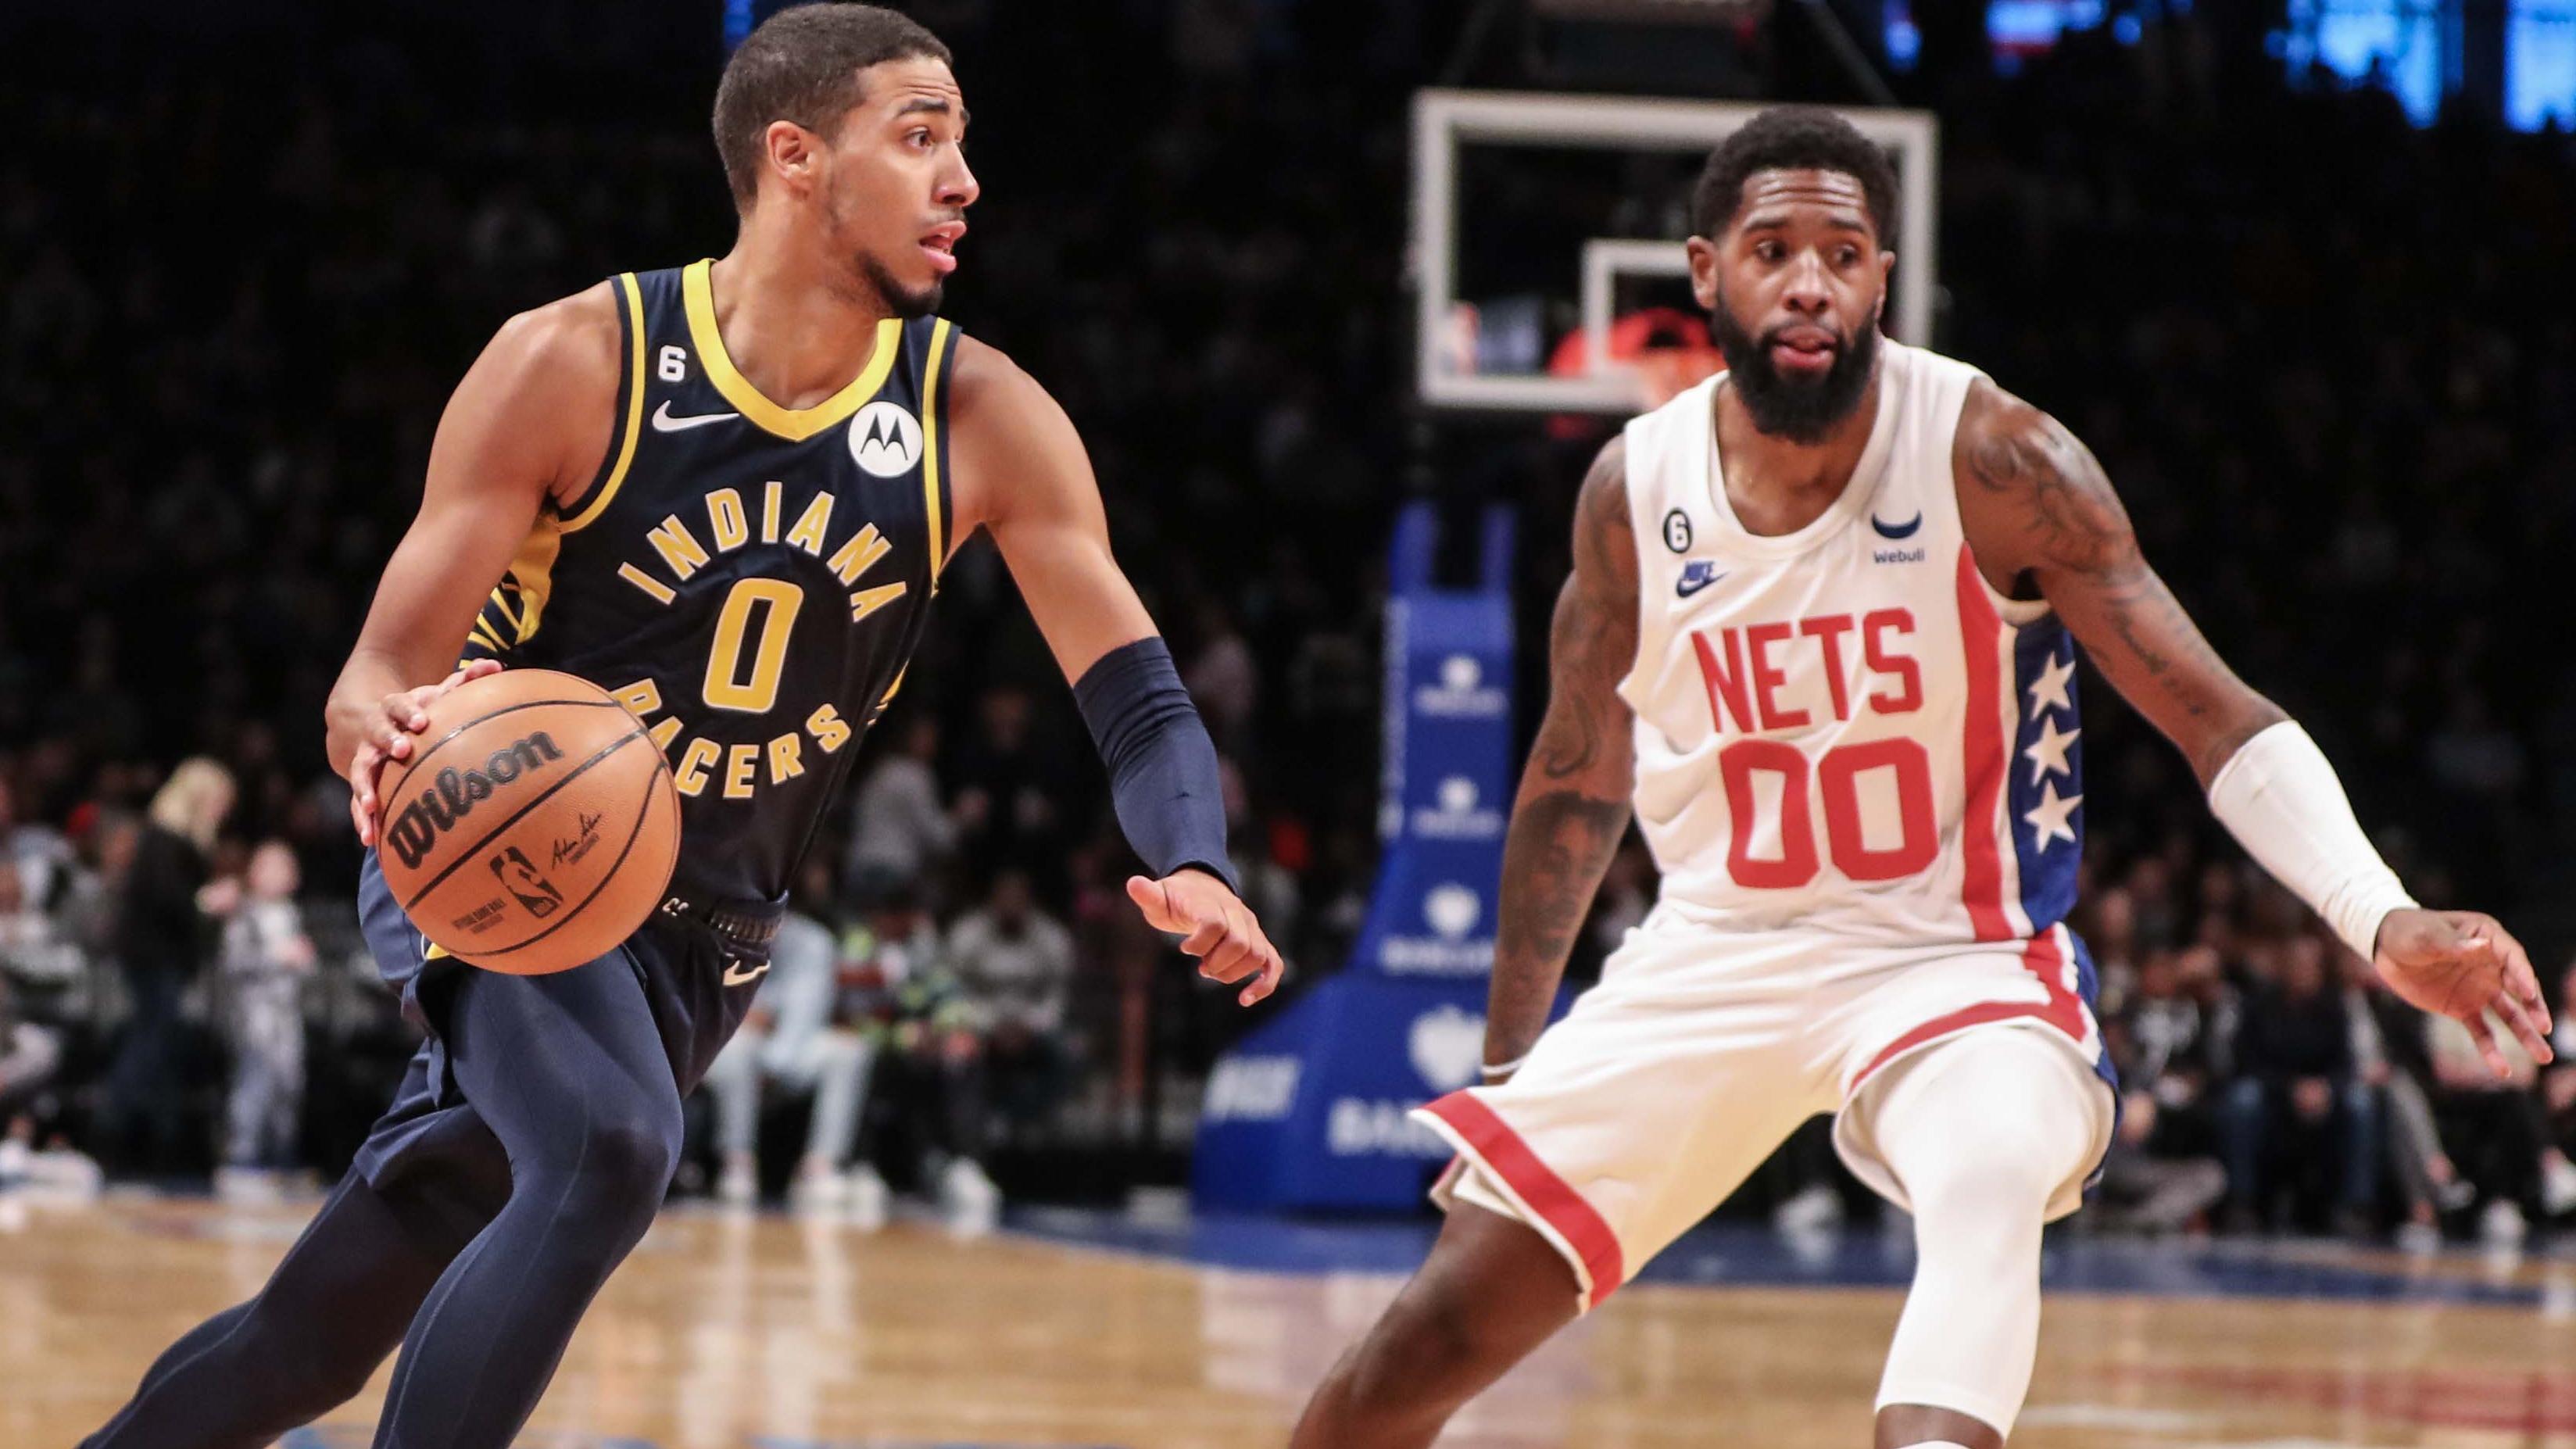 Indiana Pacers guard Tyrese Haliburton (0) dribbles the ball against Brooklyn Nets forward Royce O'Neale (00) in the first quarter at Barclays / Wendell Cruz - USA TODAY Sports